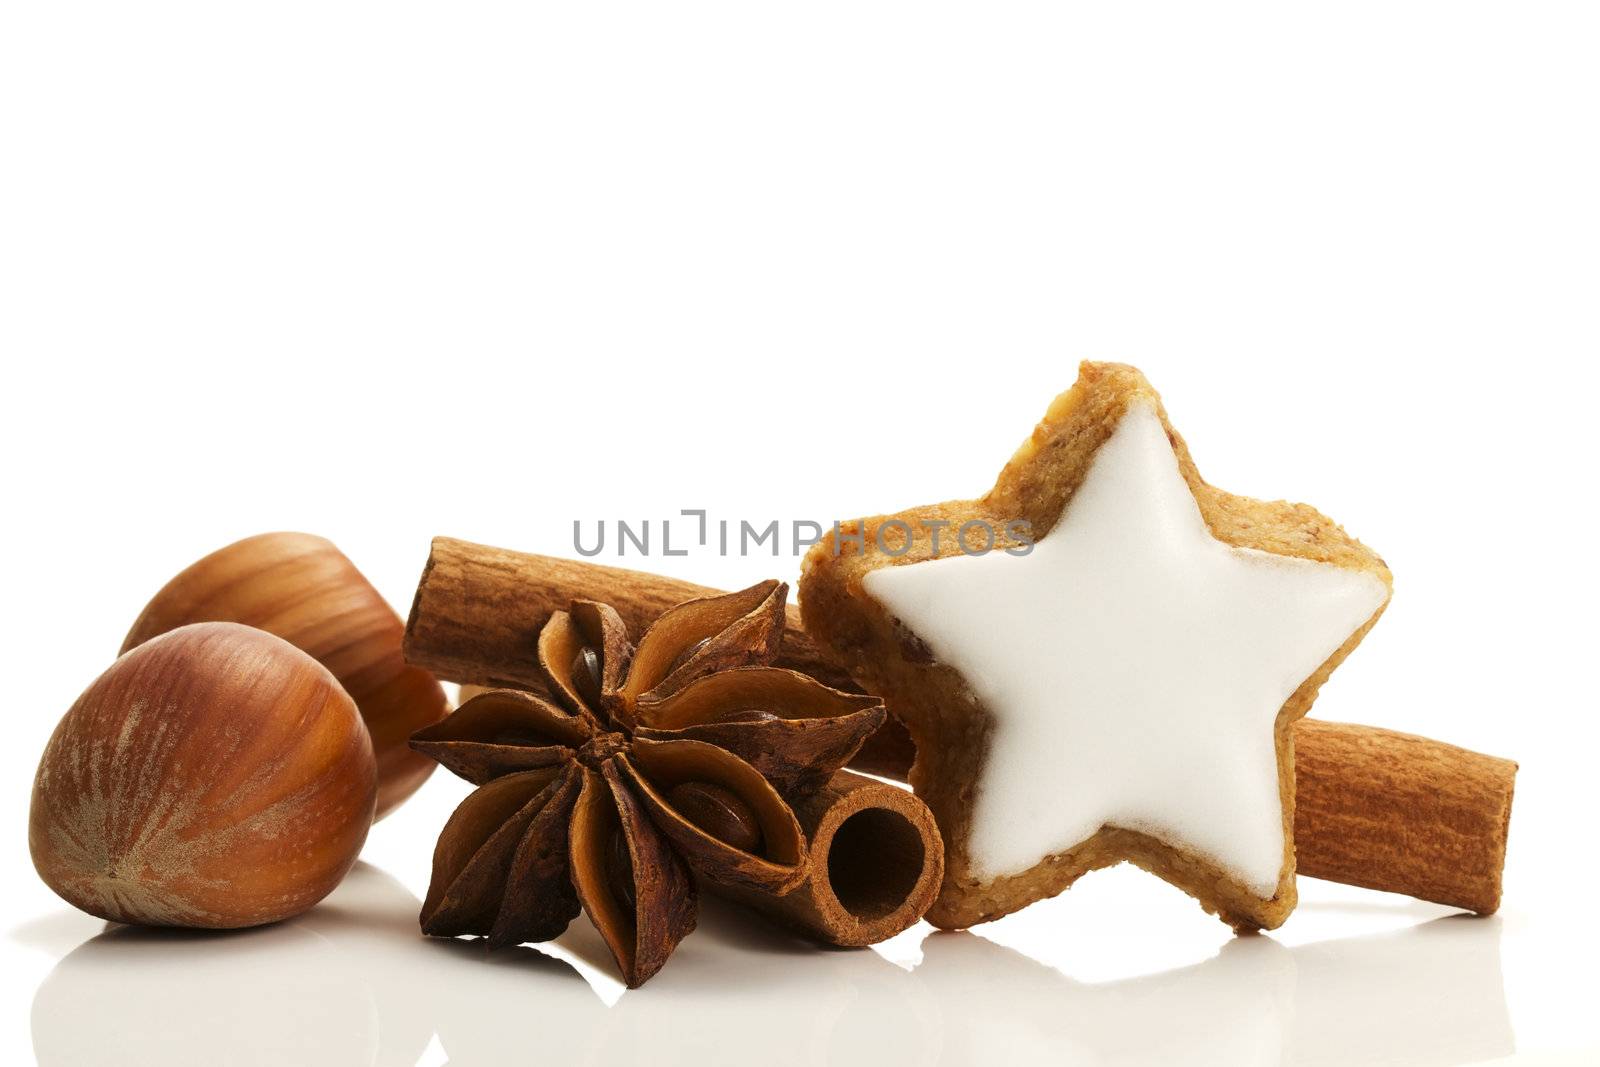 star shaped cinnamon biscuit with cinnamon sticks and hazelnuts on white background